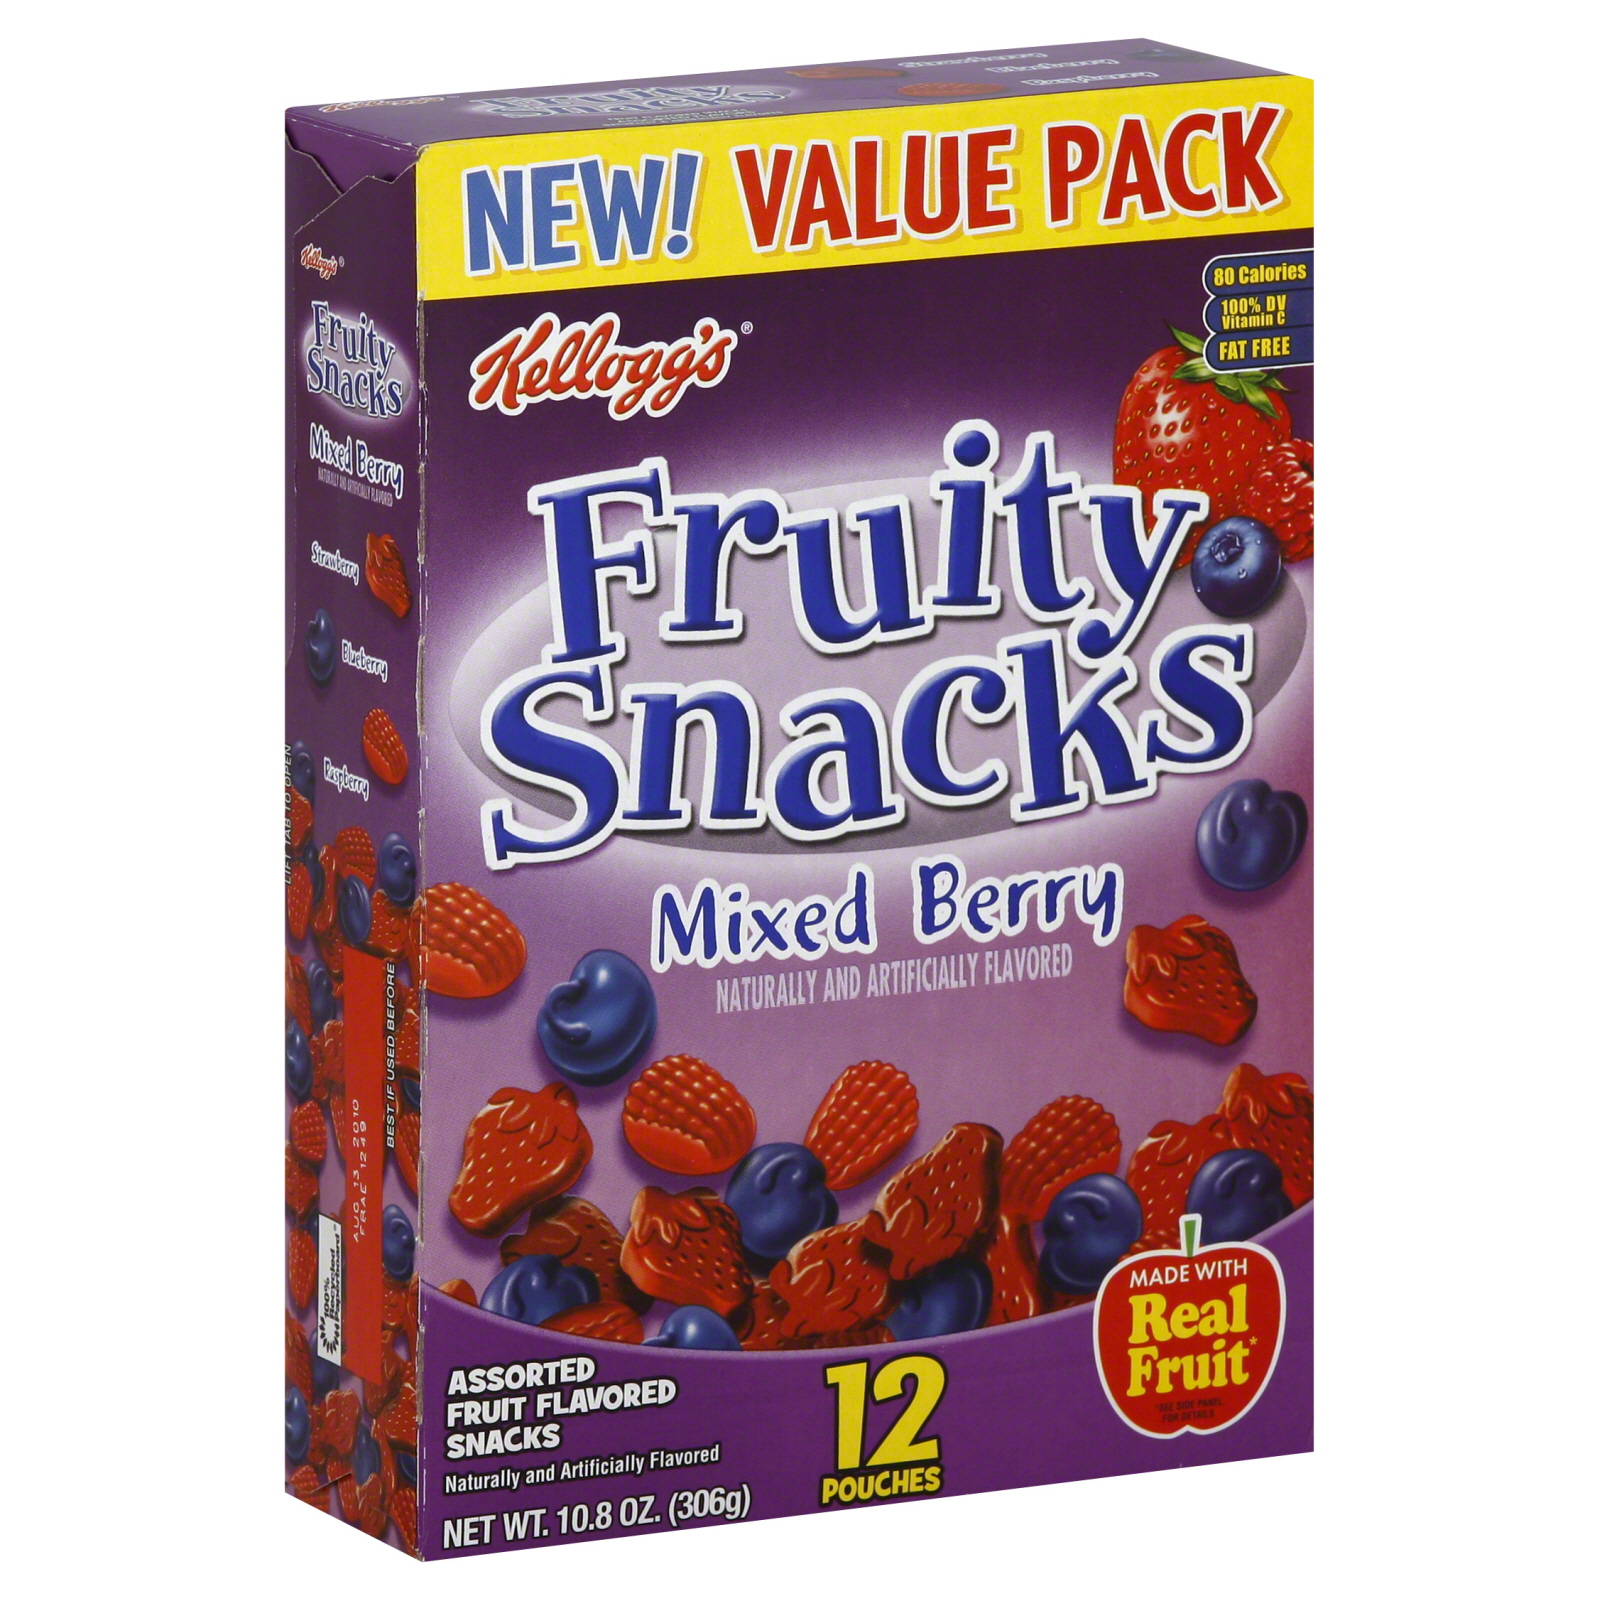 Kellogg's Fruity Snacks Snacks, Fruit Flavored, Mixed Berry, Value Pack 12 pouches [10.8 oz (306 g)]